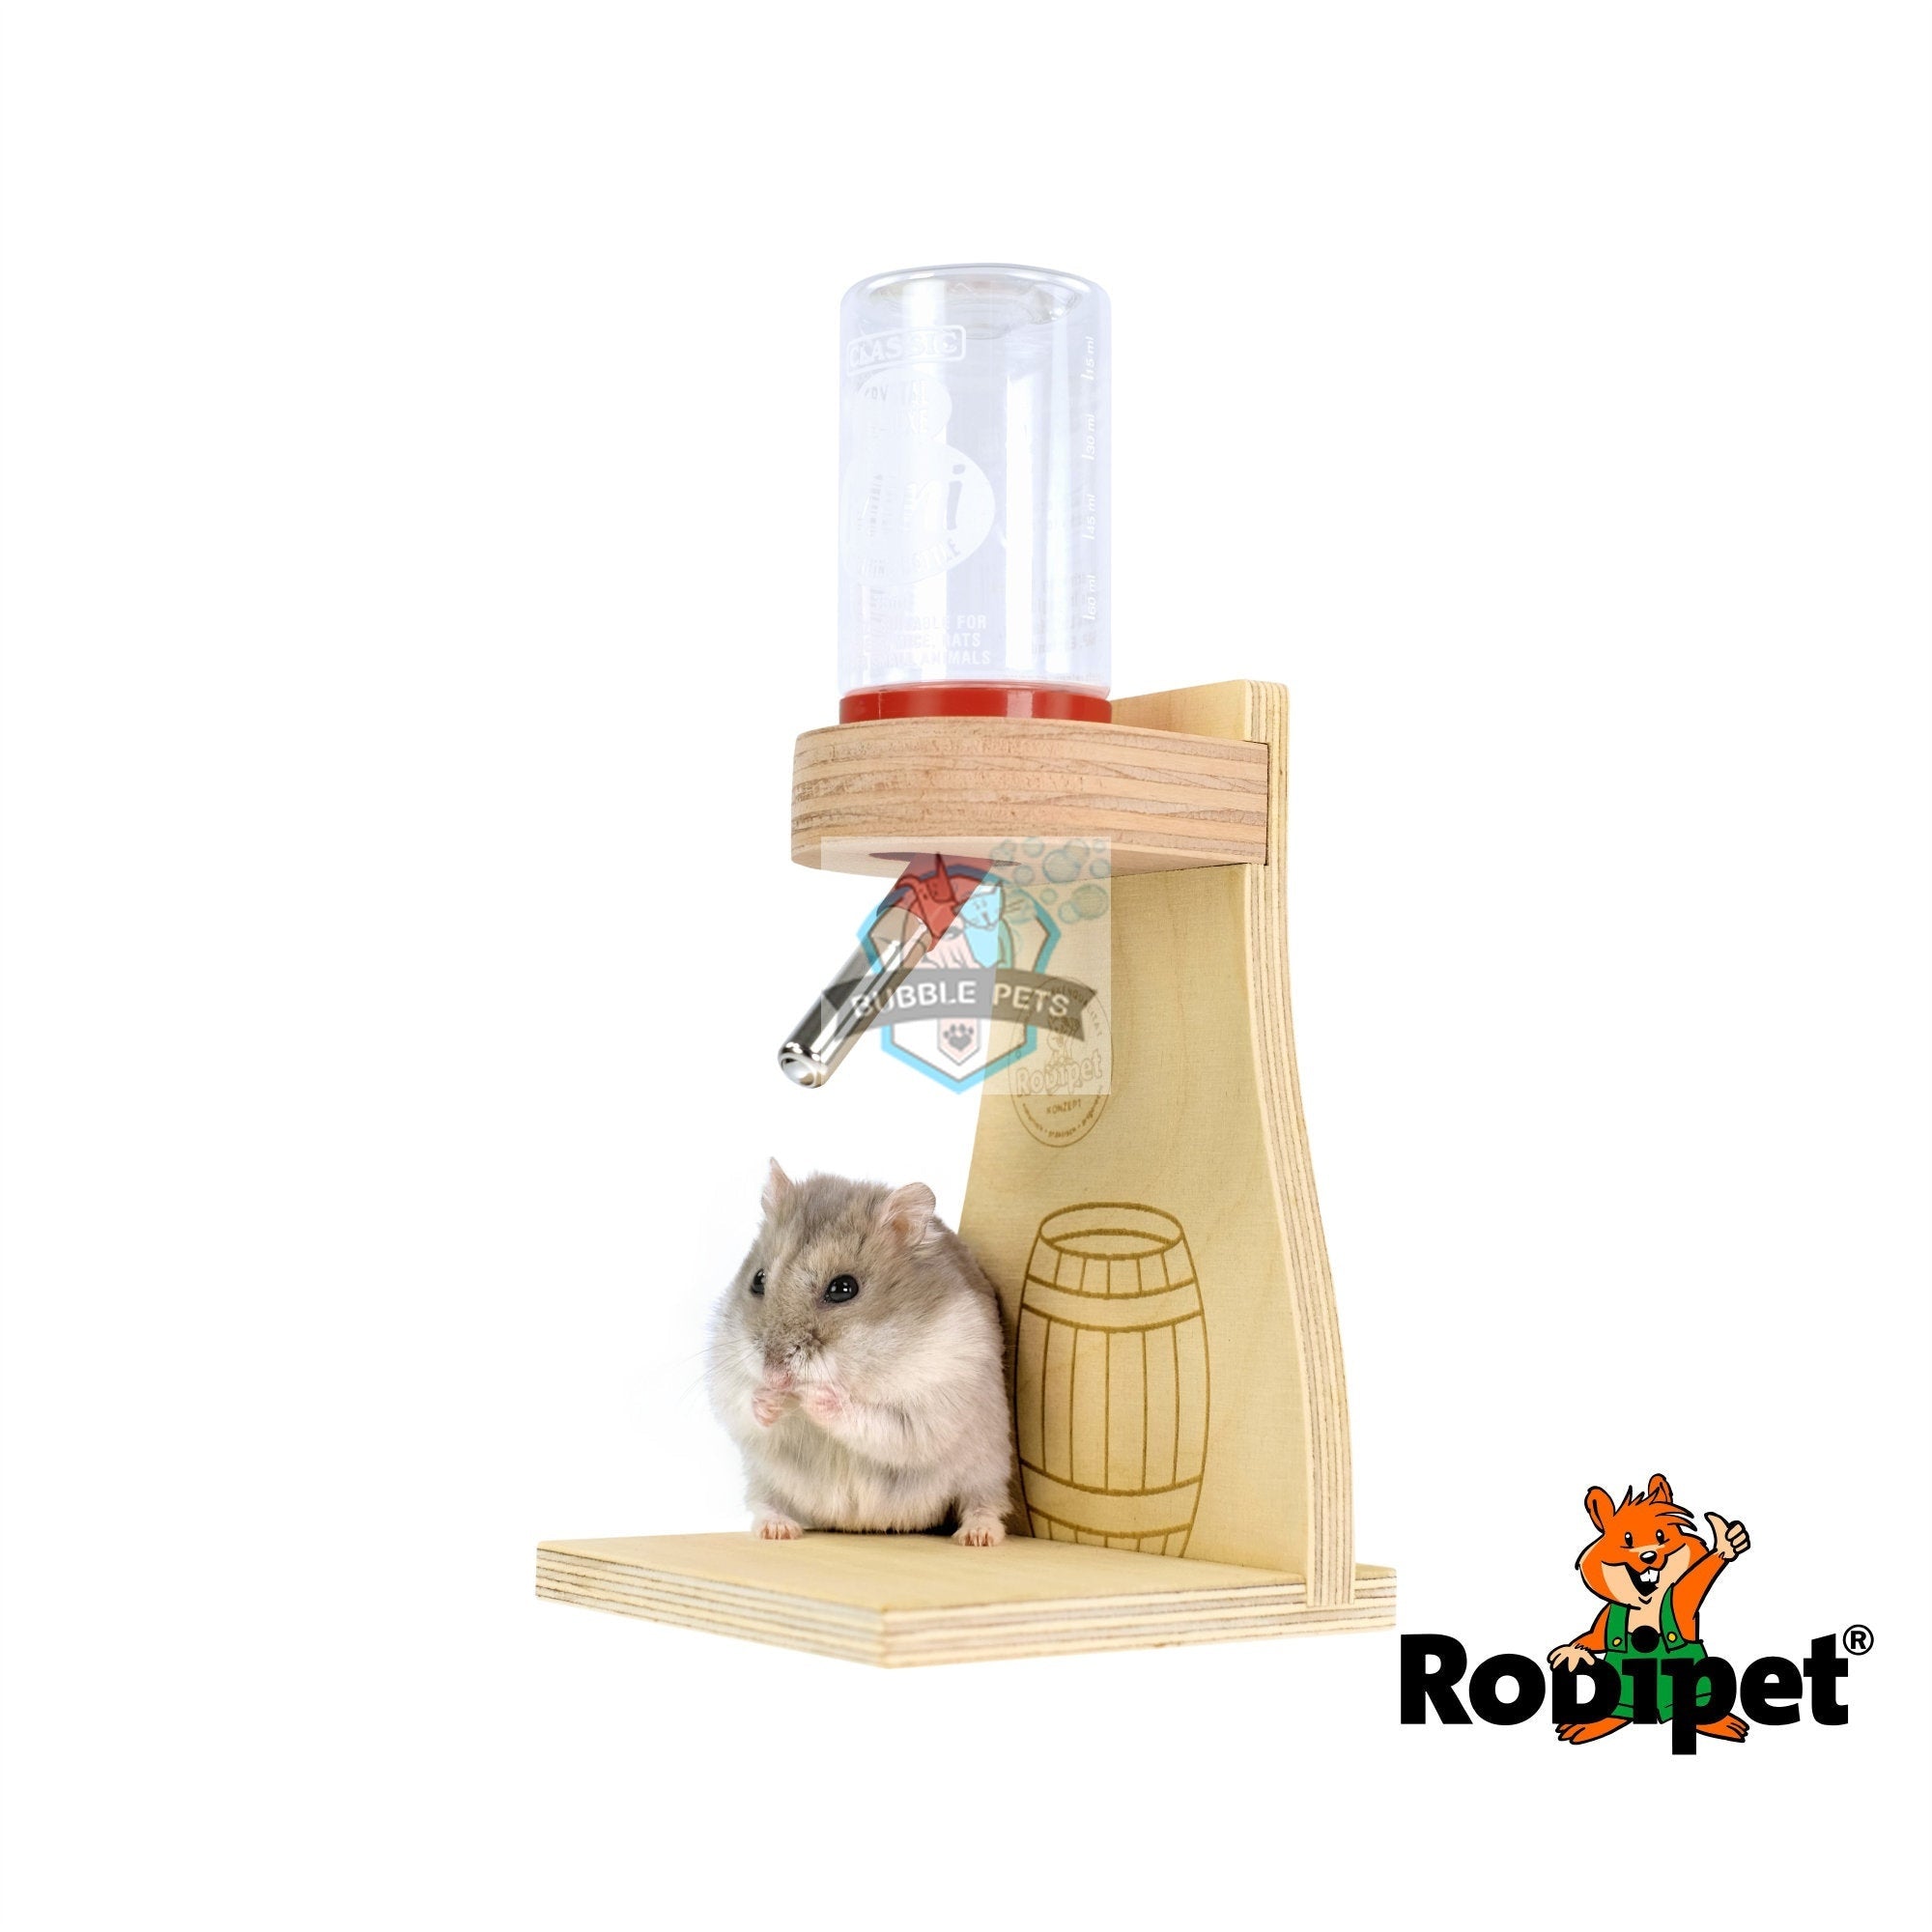 Rodipet Drink Bottle with Stand